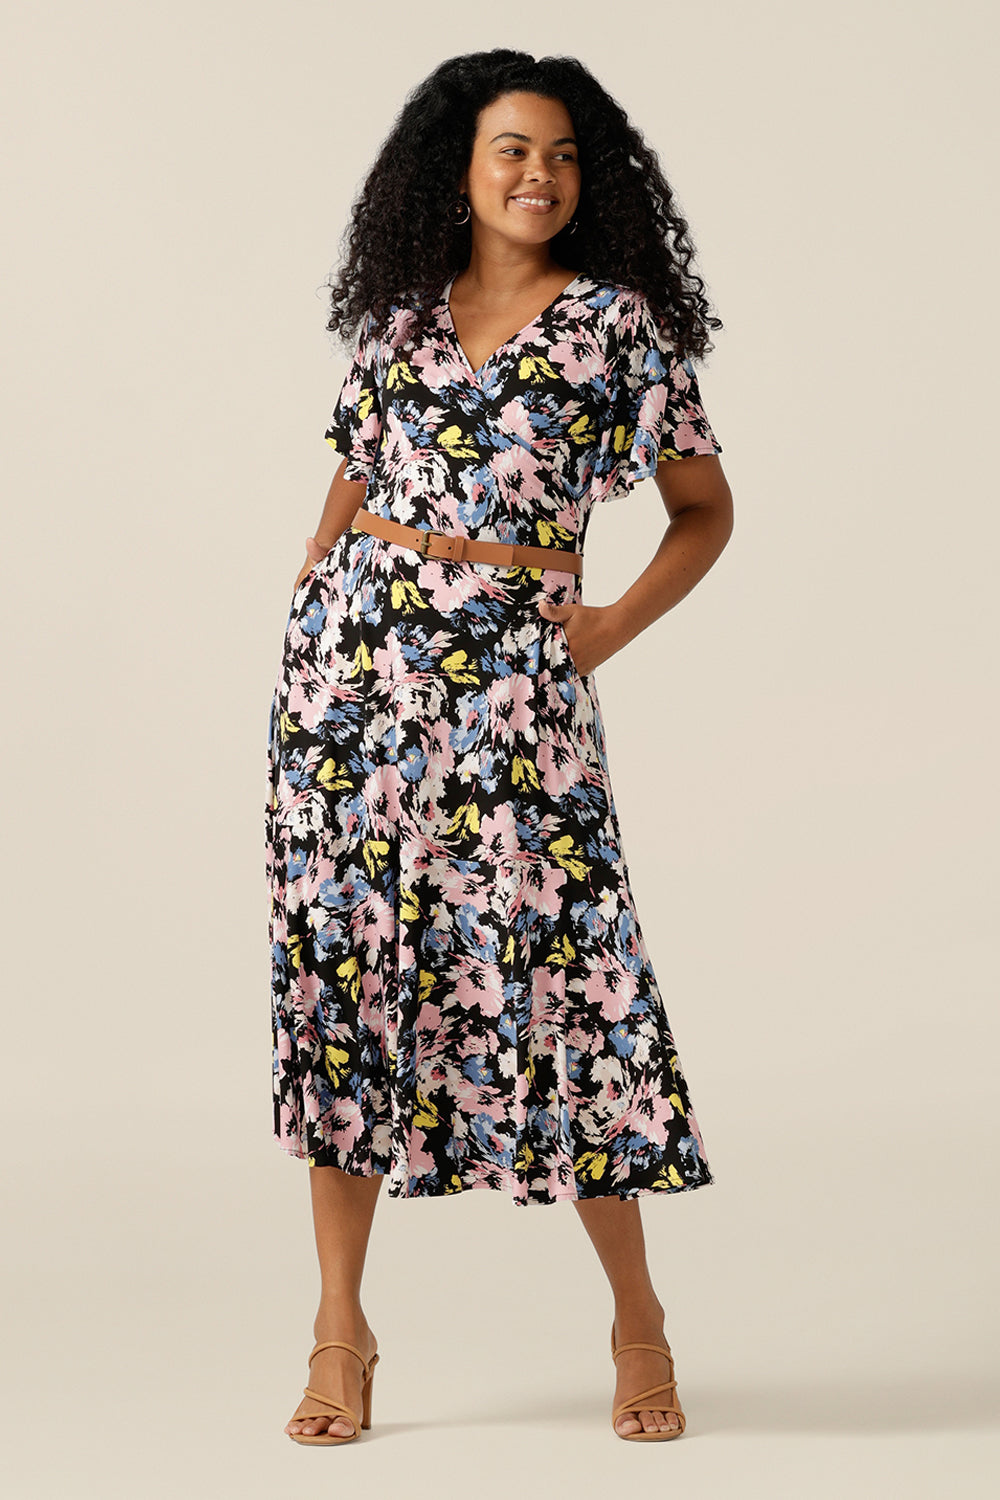 Vintage floral print dresses for women over 40, the Nicolle Reversible Dress is shown here on a size 12 curvy woman. A reversible style dress, she is worn here as wrap front with V-neckline but can worn with a boat neckline. A dress with arm coverage, it has short sleeves and a full midi-length skirt. A dress for feminine corporate dressing and work attire, this dress comes in sizes 8 to sizes 24.  